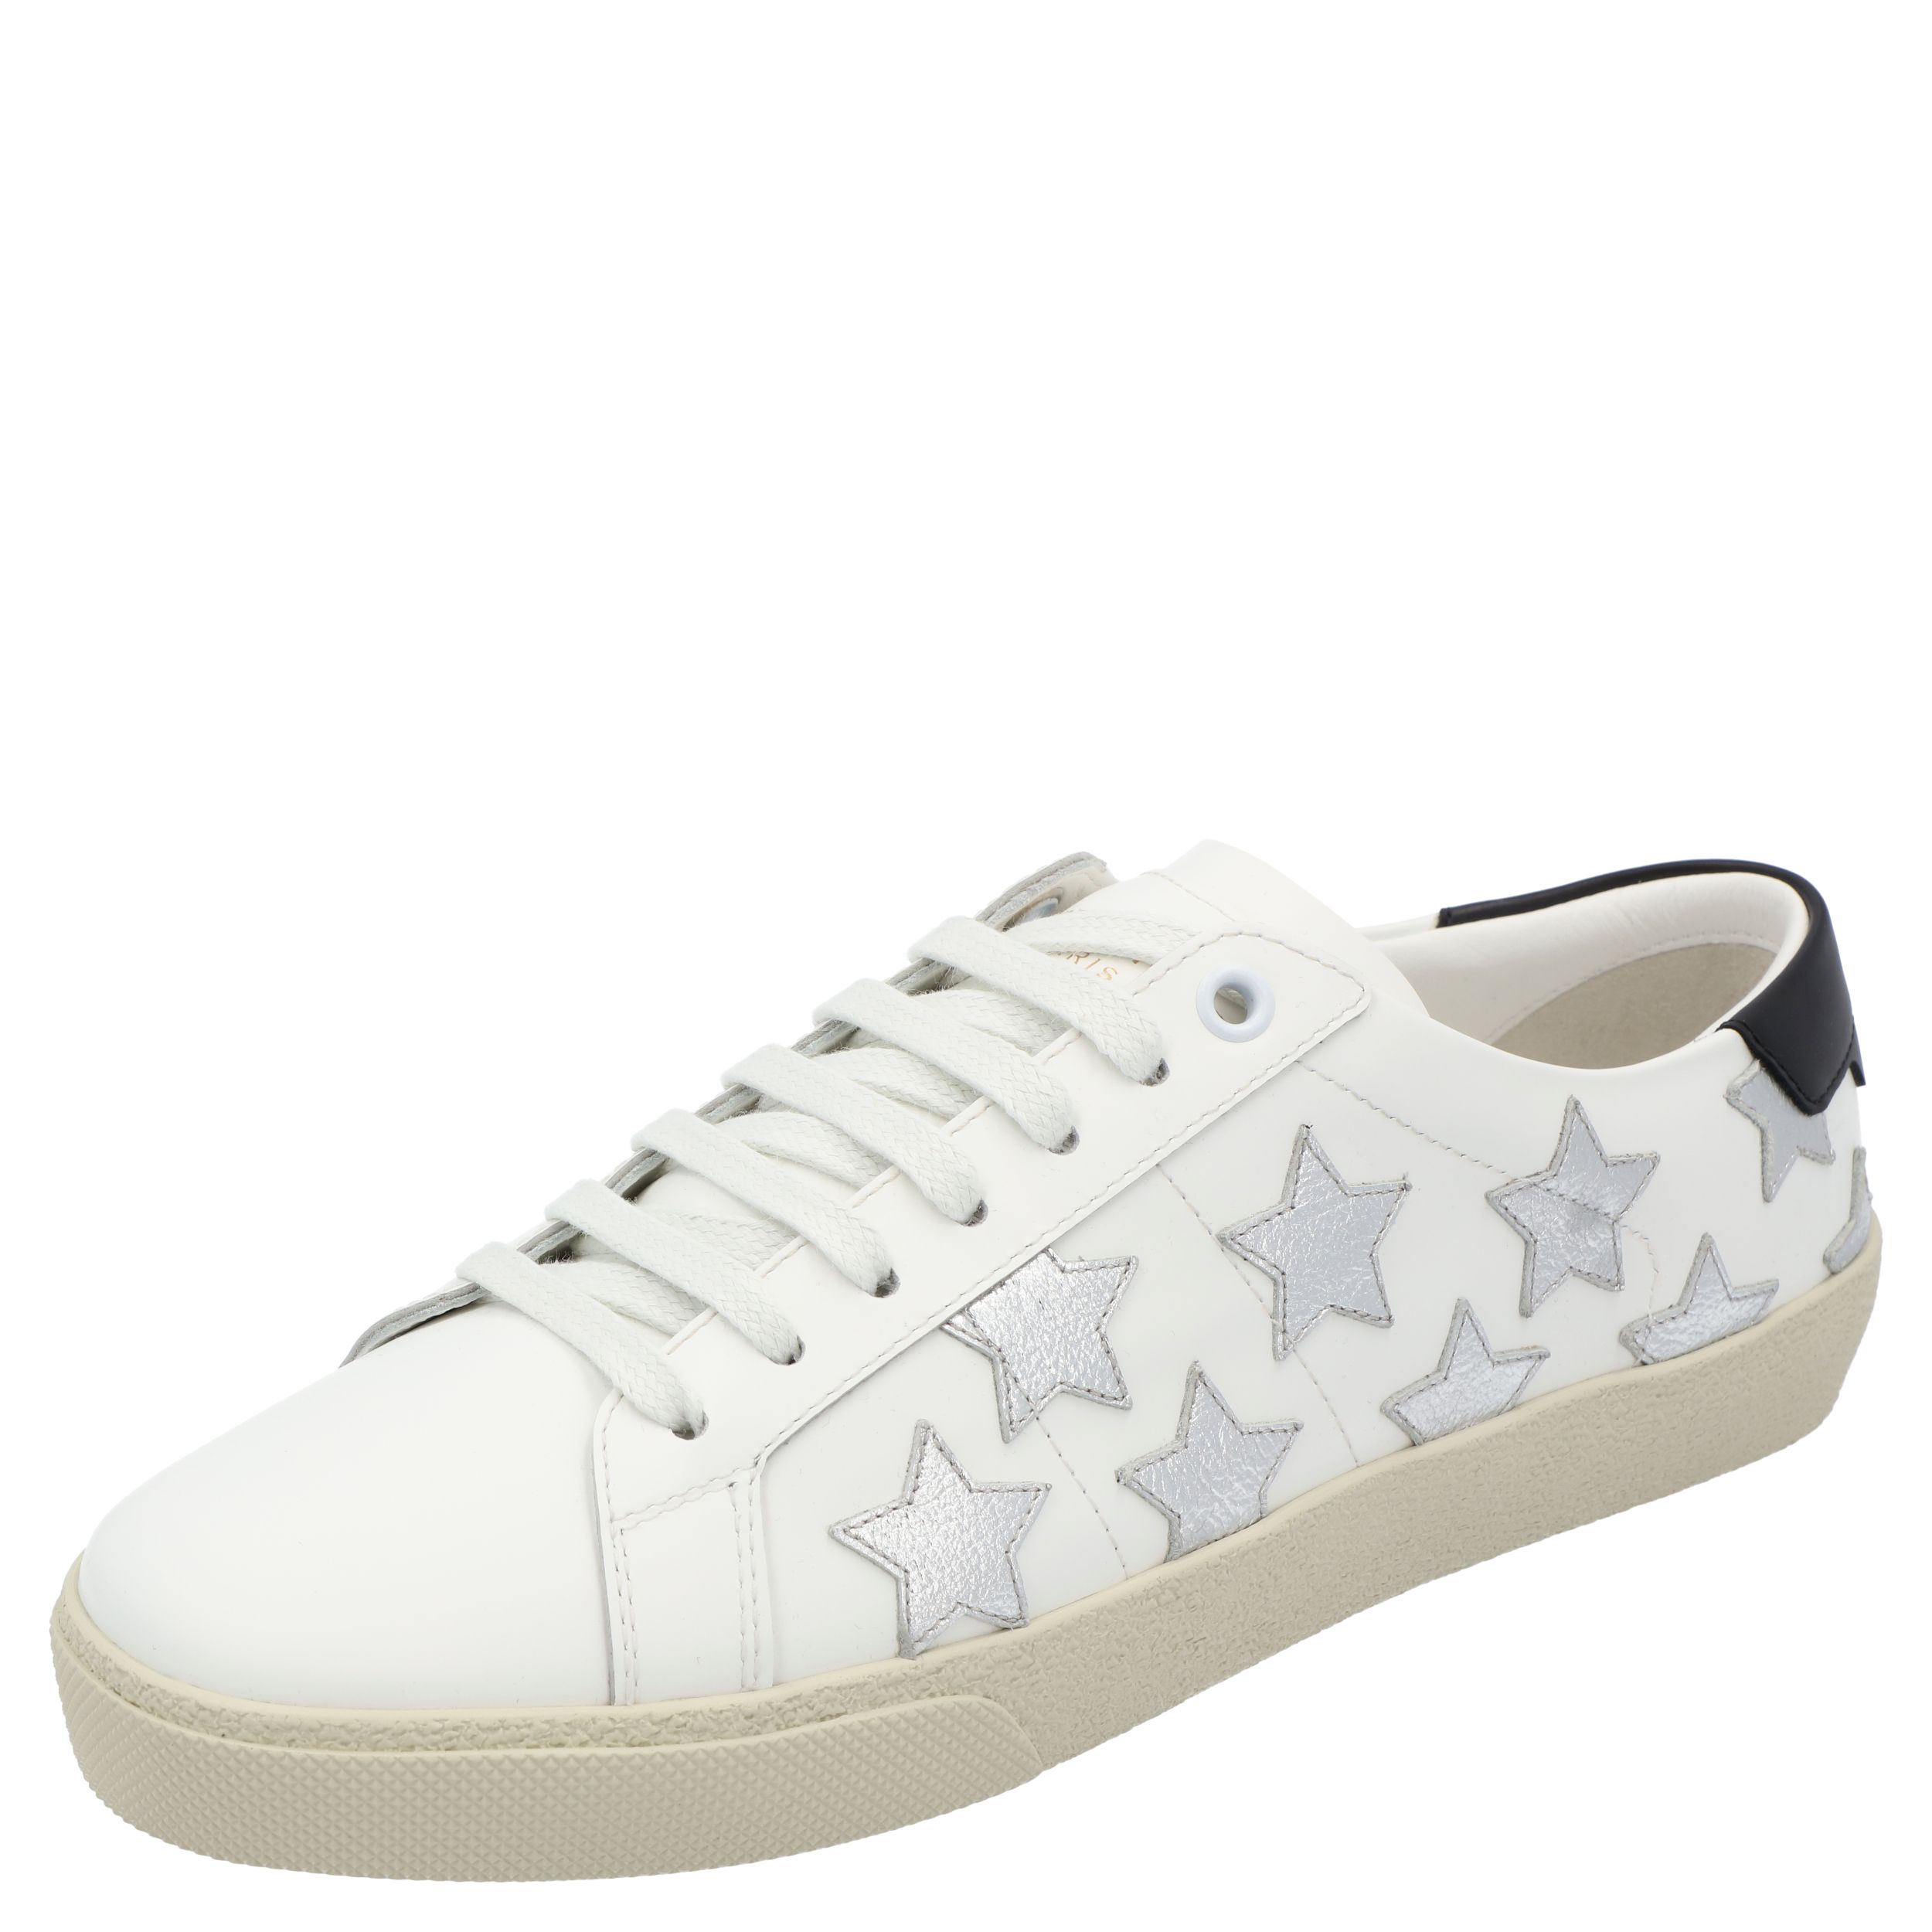 Pre-owned Saint Laurent White Leather Court Classic Sl/06 California Sneakers Size Eu 35.5